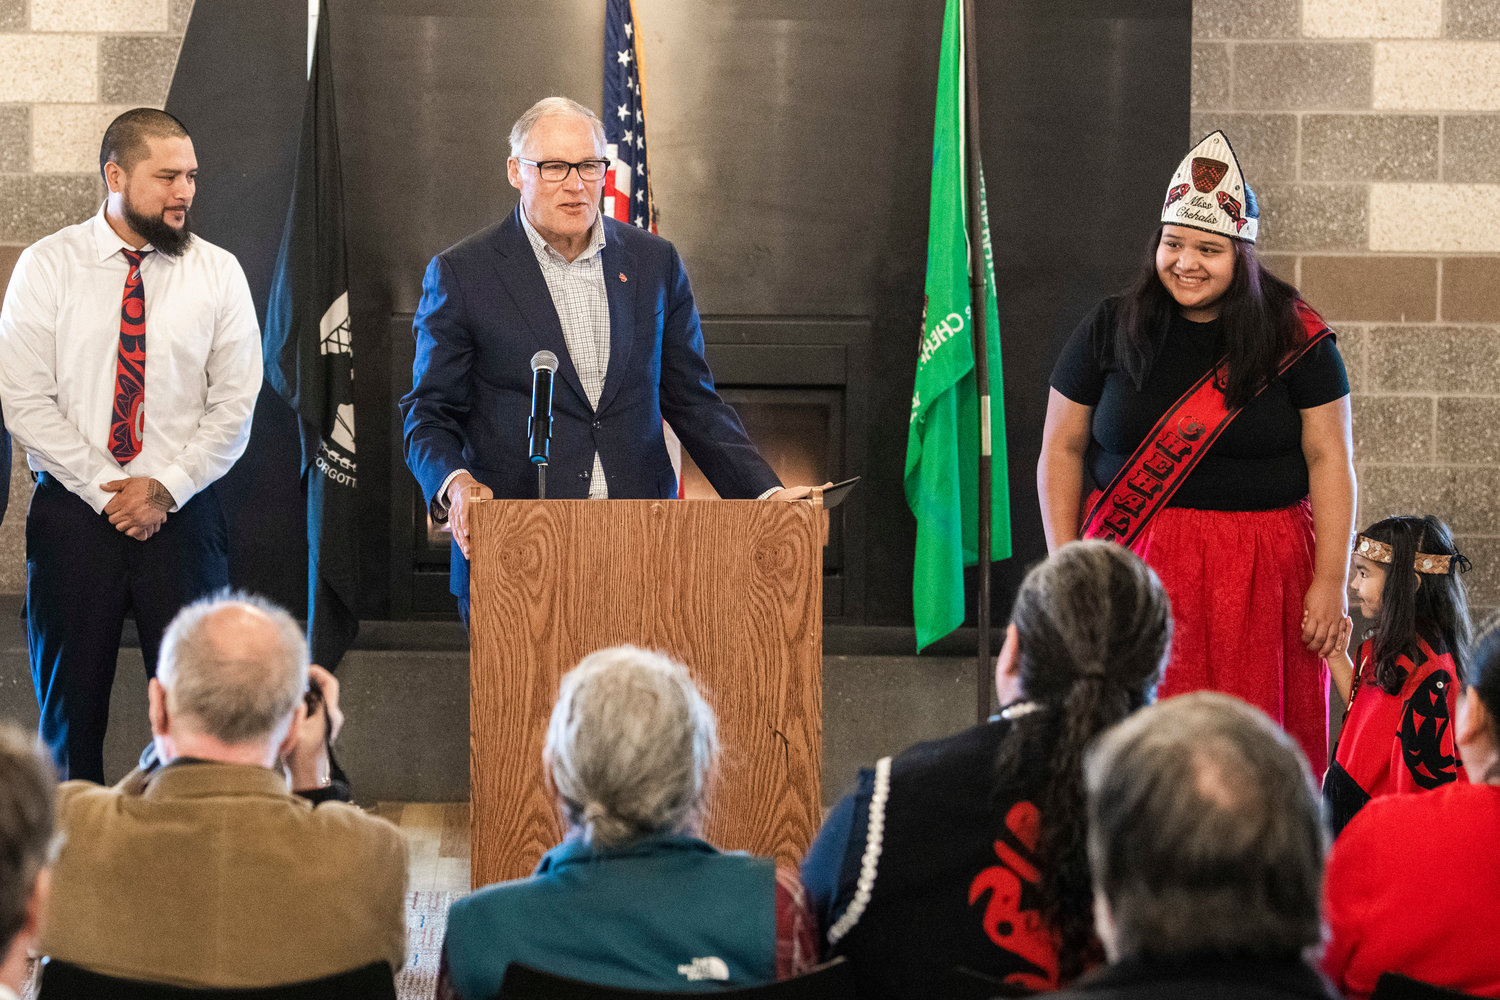 Gov. Jay Inslee talks about the future of Washington state noting the importance of hydrogen power while pointing to 4-year-old Tamika Starr during a meeting at the Chehalis Tribe Community Center Wednesday morning near Oakville.